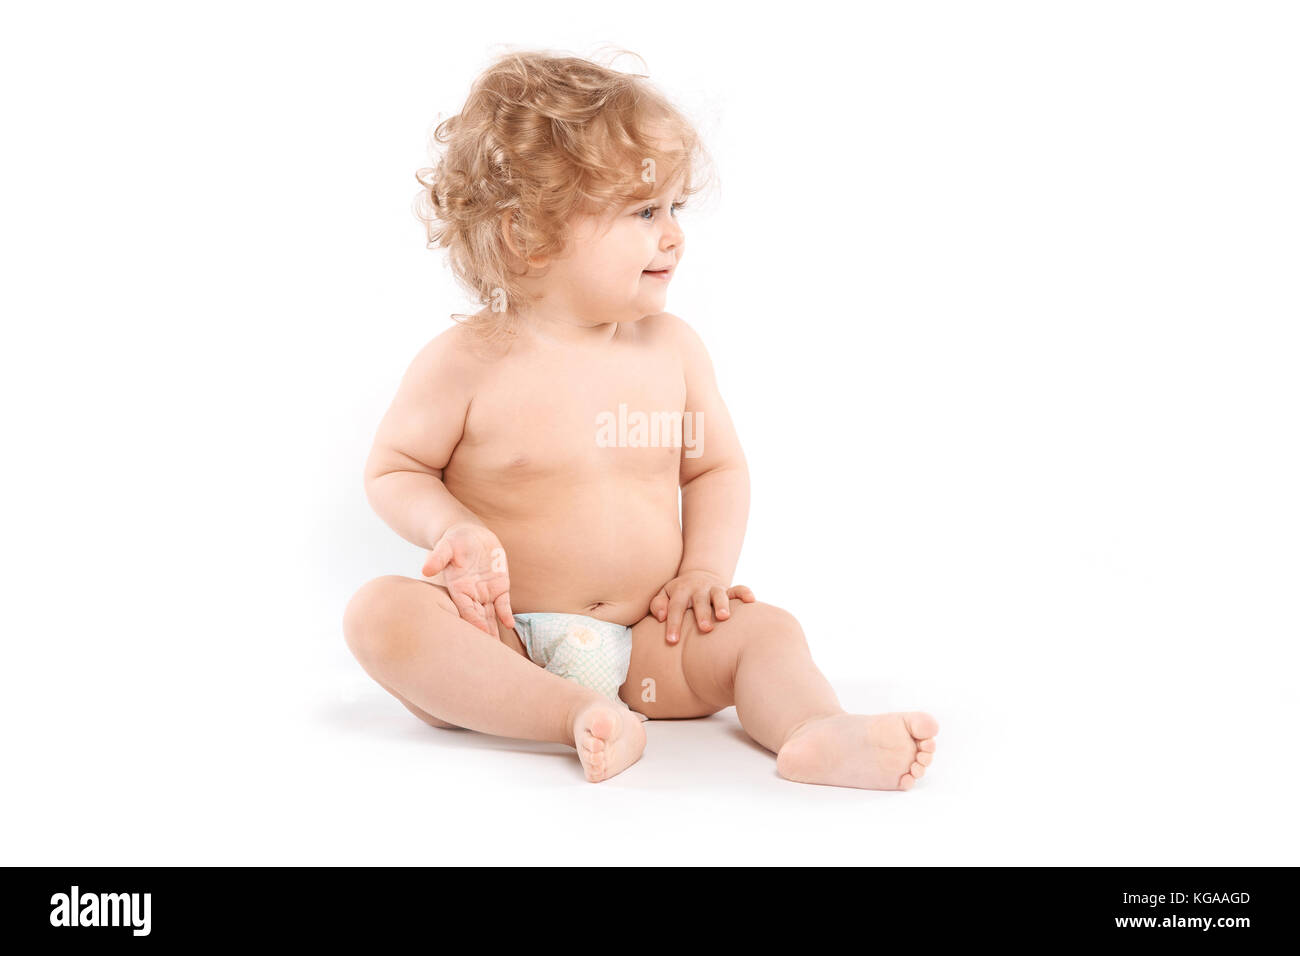 little girl in a diaper Stock Photo